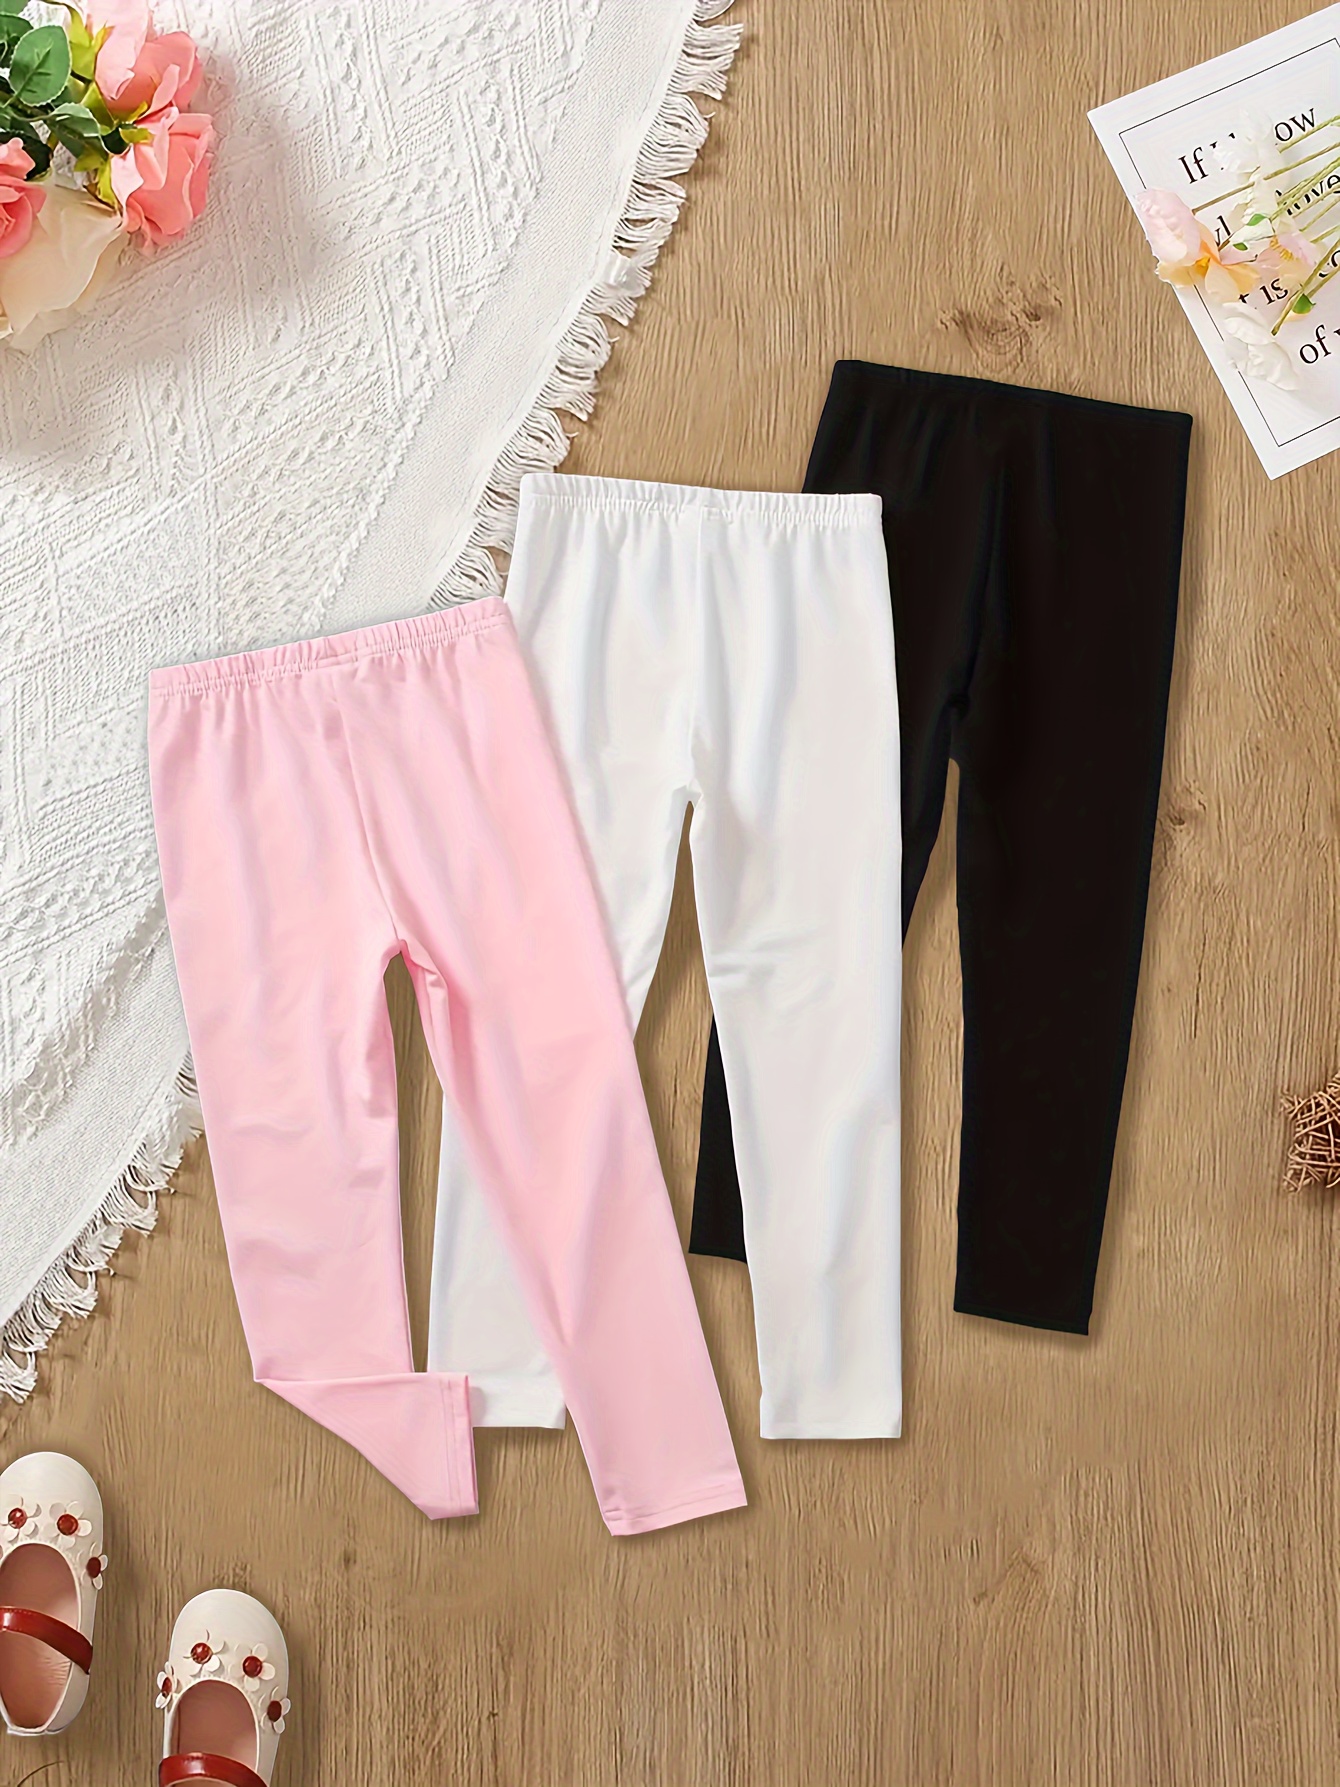 Trendy Girls 2pcs Comfy Starry Sky Graphic Leggings, Casual & Versatile  Pants For Party Gift